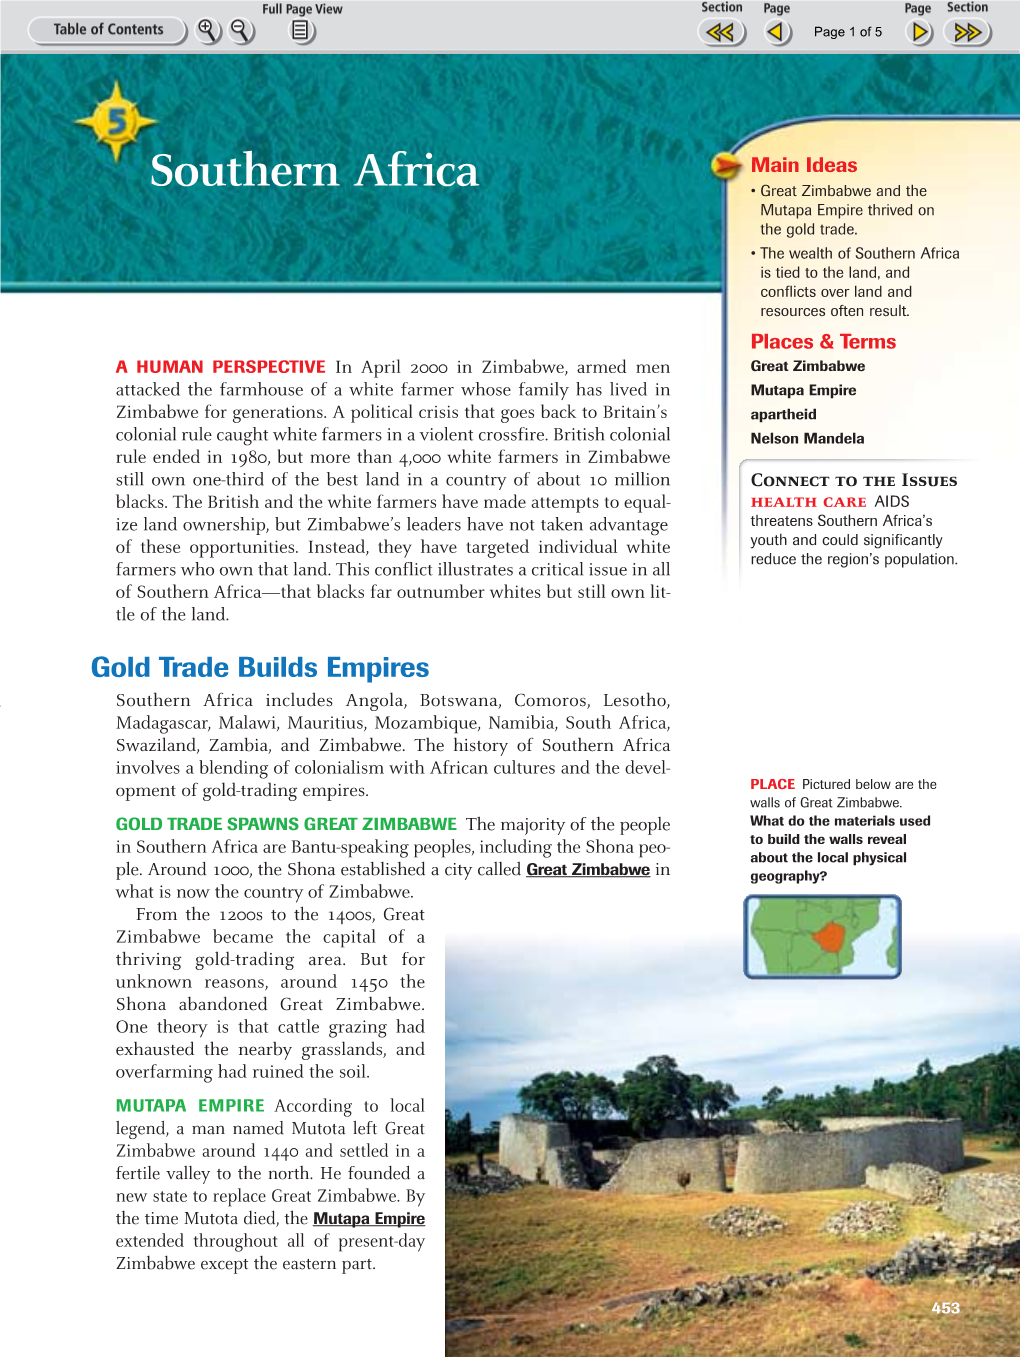 Southern Africa • Great Zimbabwe and the Mutapa Empire Thrived on the Gold Trade